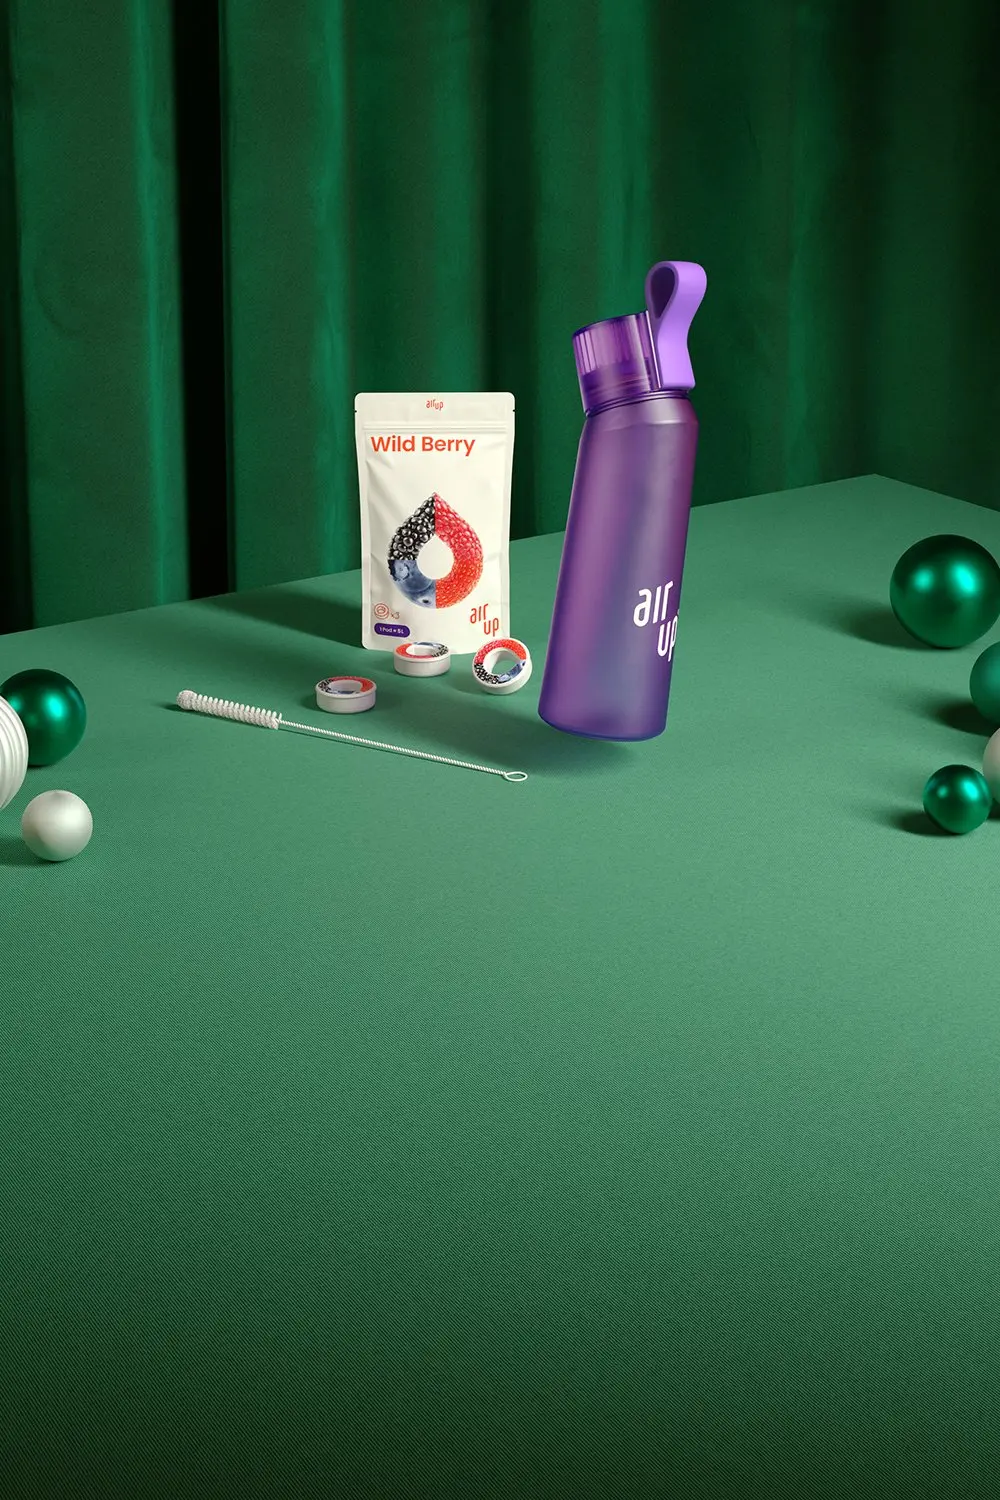 A display of air up bottles and pods on a holiday themed table